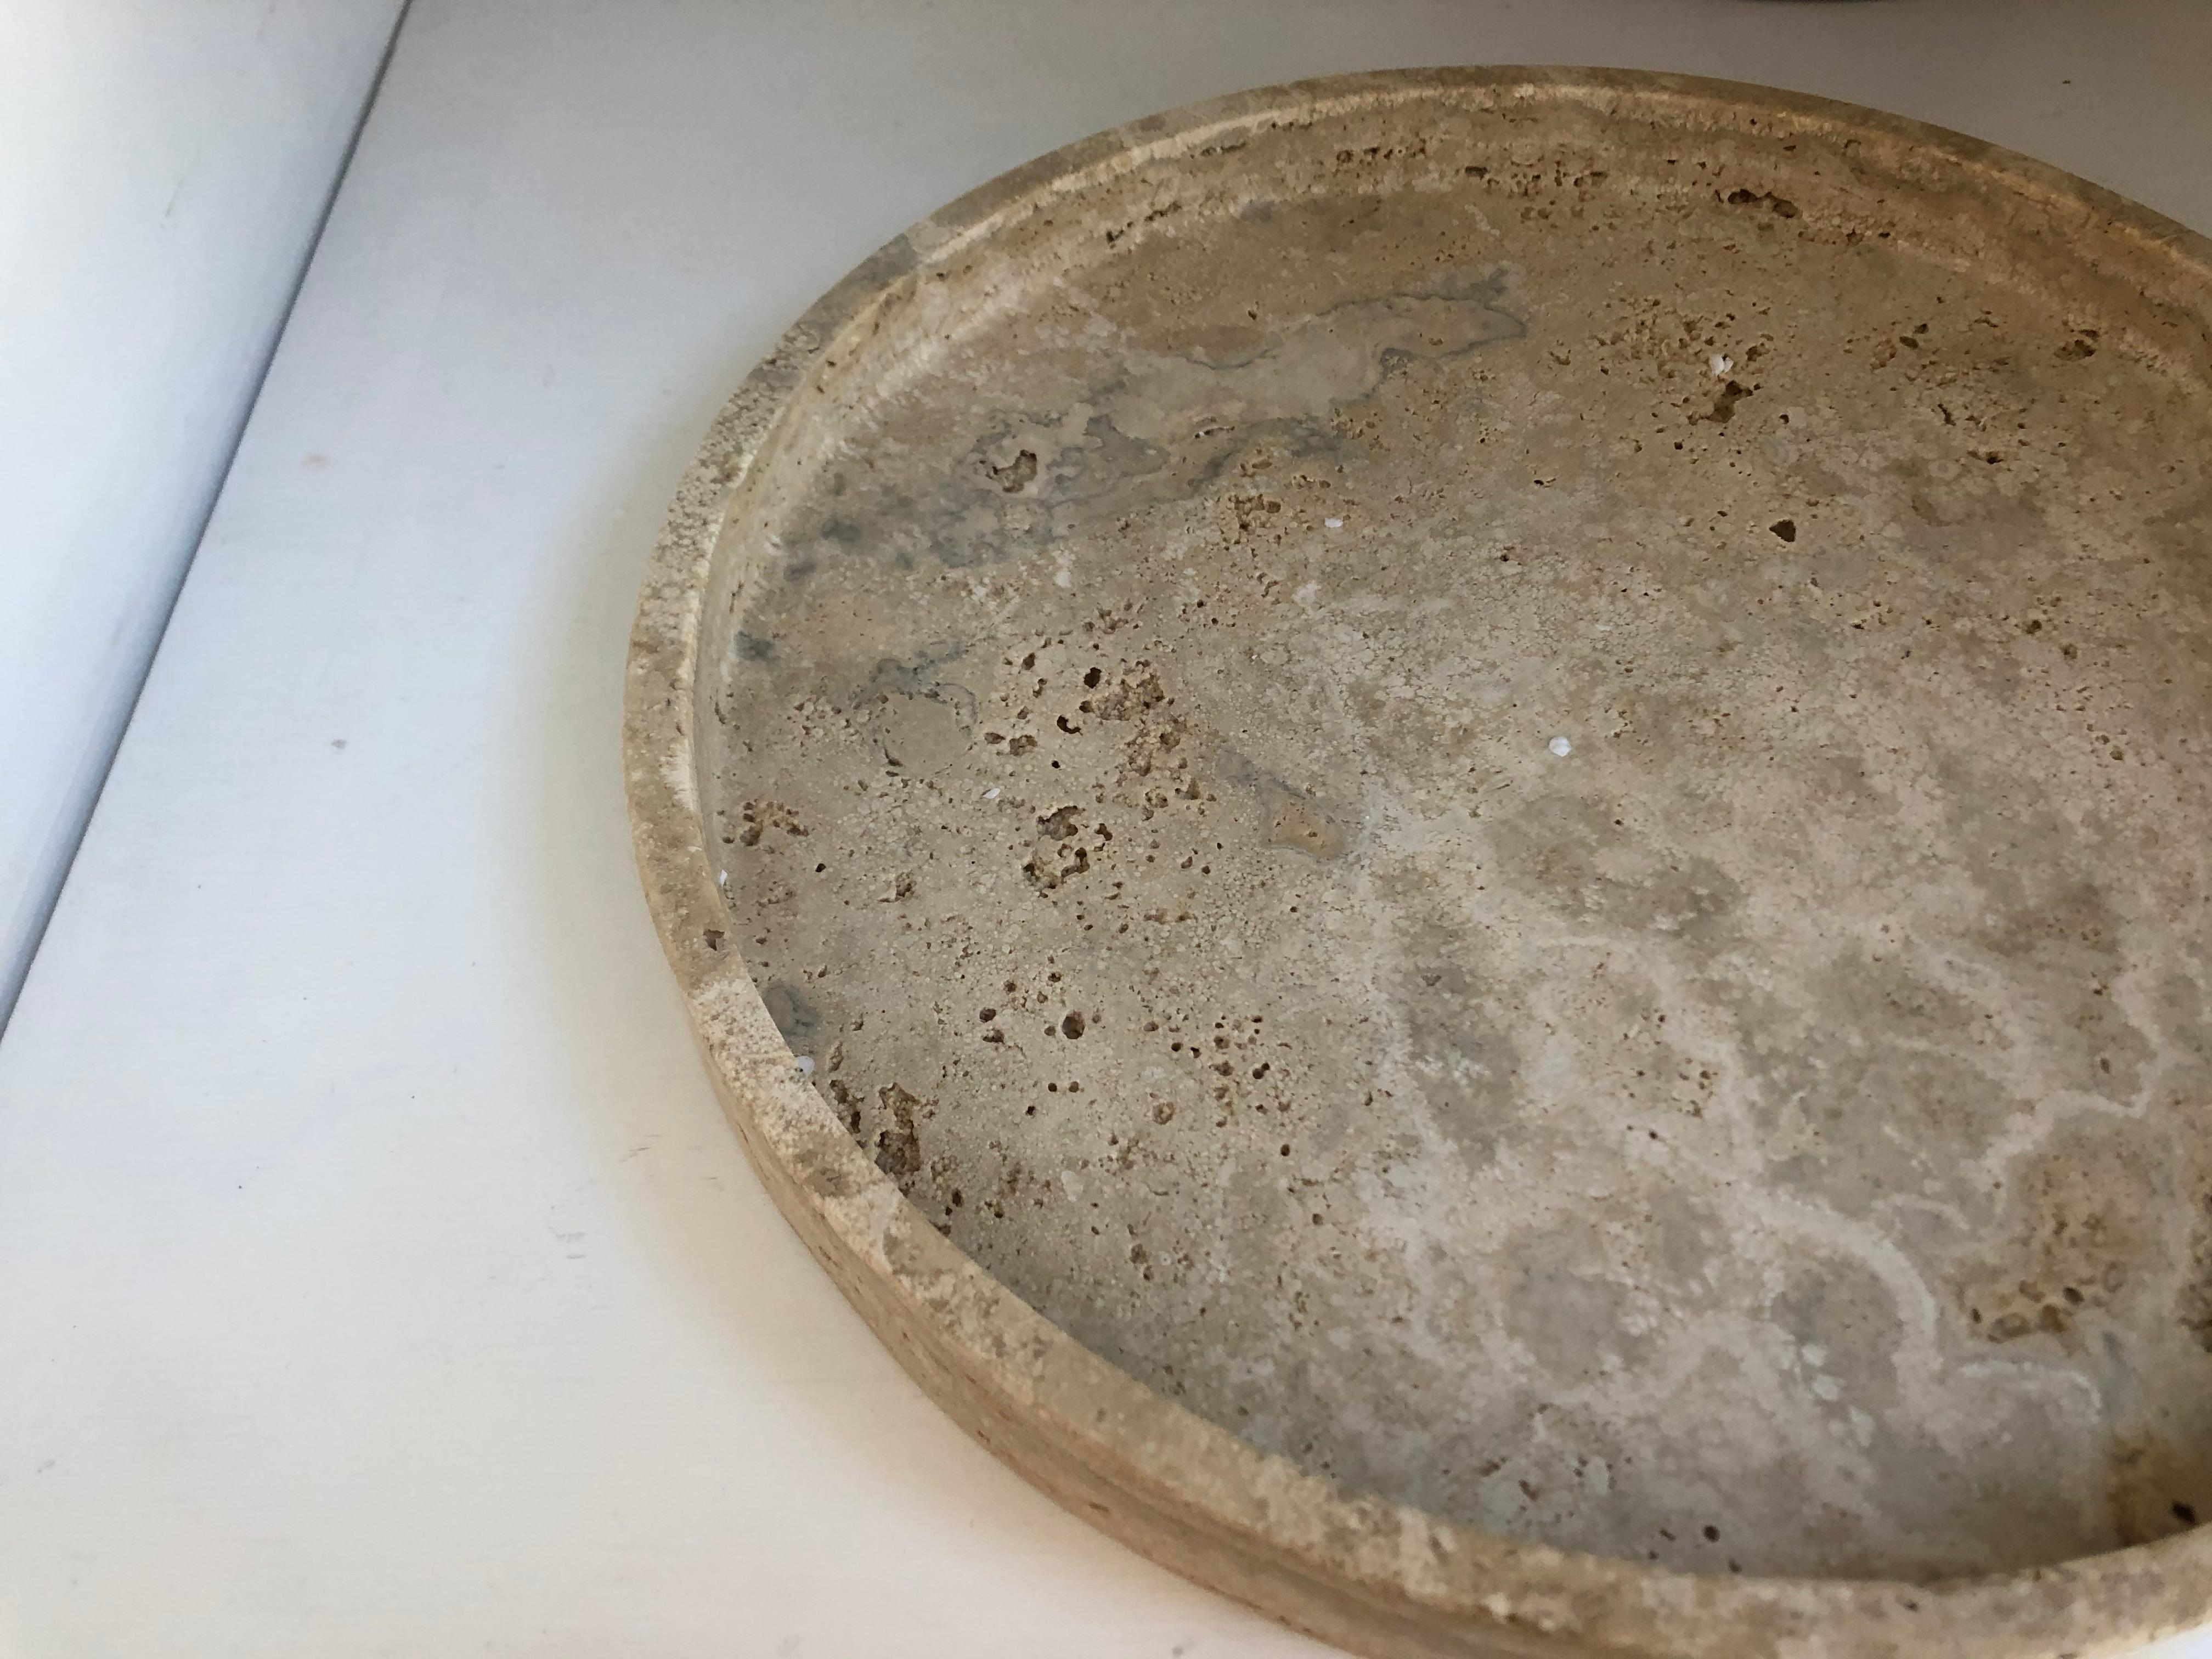 Roman round travertine tray by Le Lampade.
Made in Italy 
This item can be also custom made.